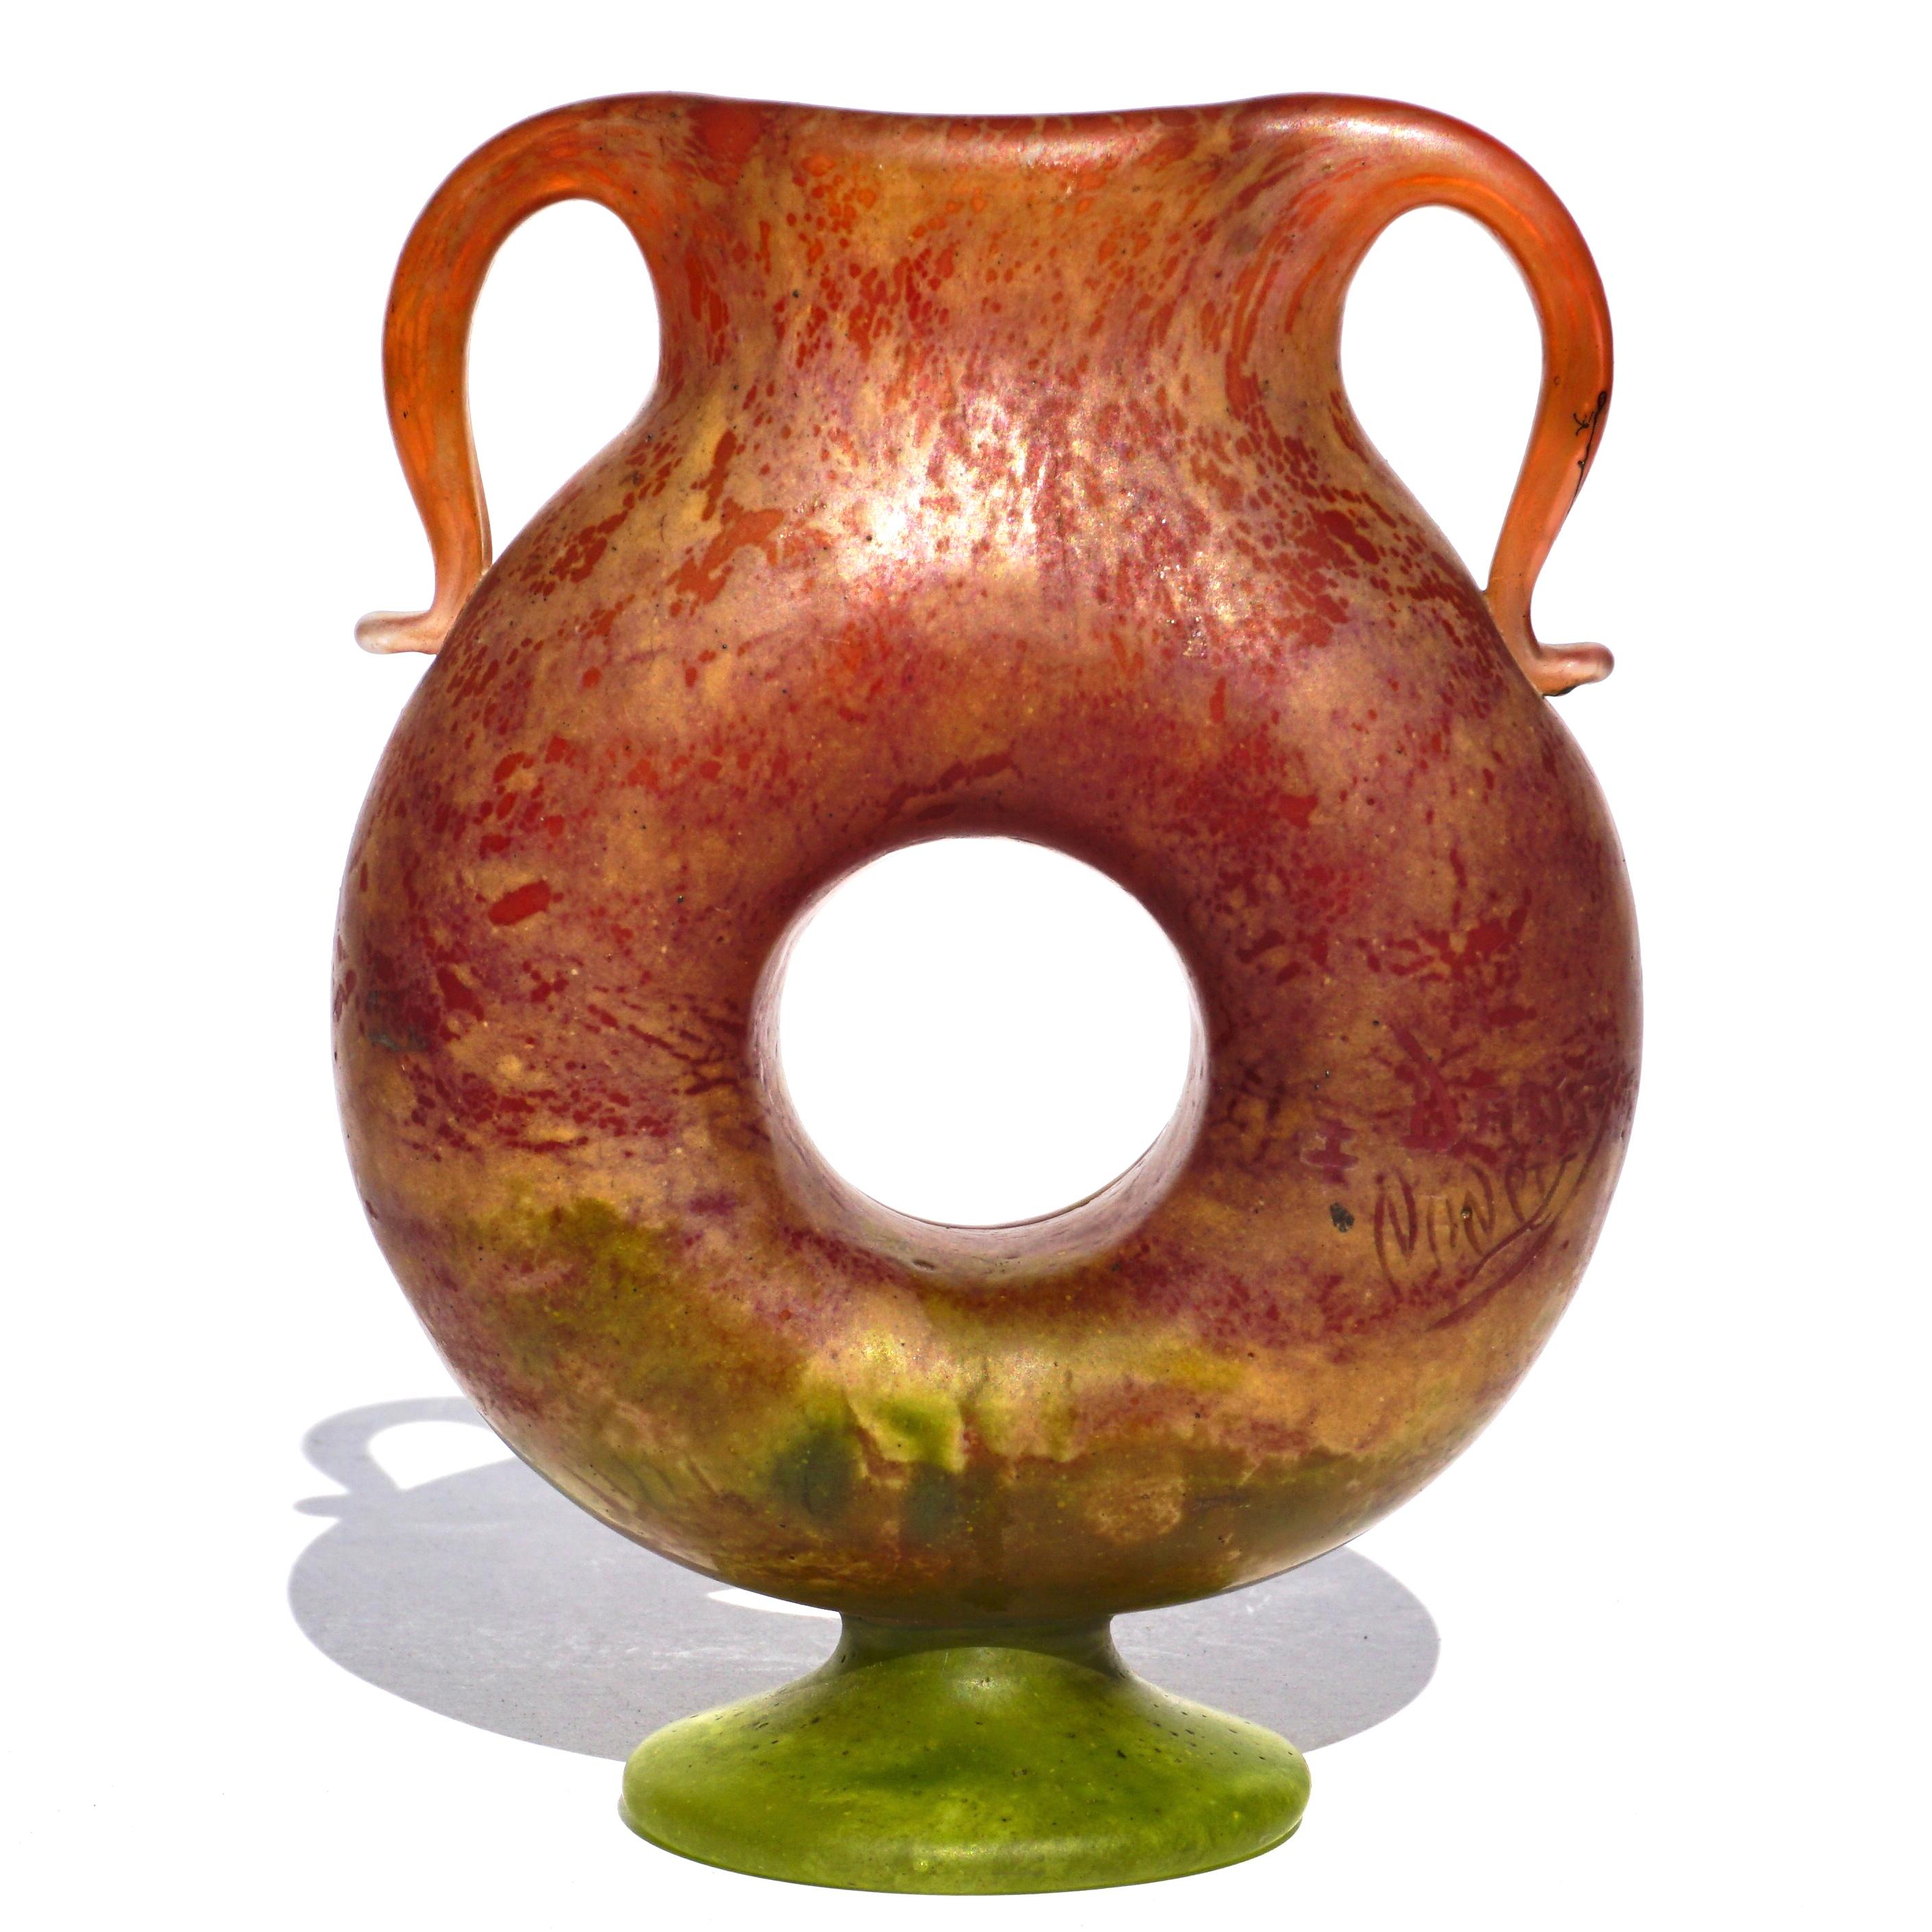 Daum Nancy Art Nouveau Applied Handle footed Vase. A very rare donut shaped vase with beautiful applied handles. From reds to pinks to creams to green.

Height: 5 Inches
Width: 3.75 Inches

Condition: Mint

Signed Daum Nancy with Cross of